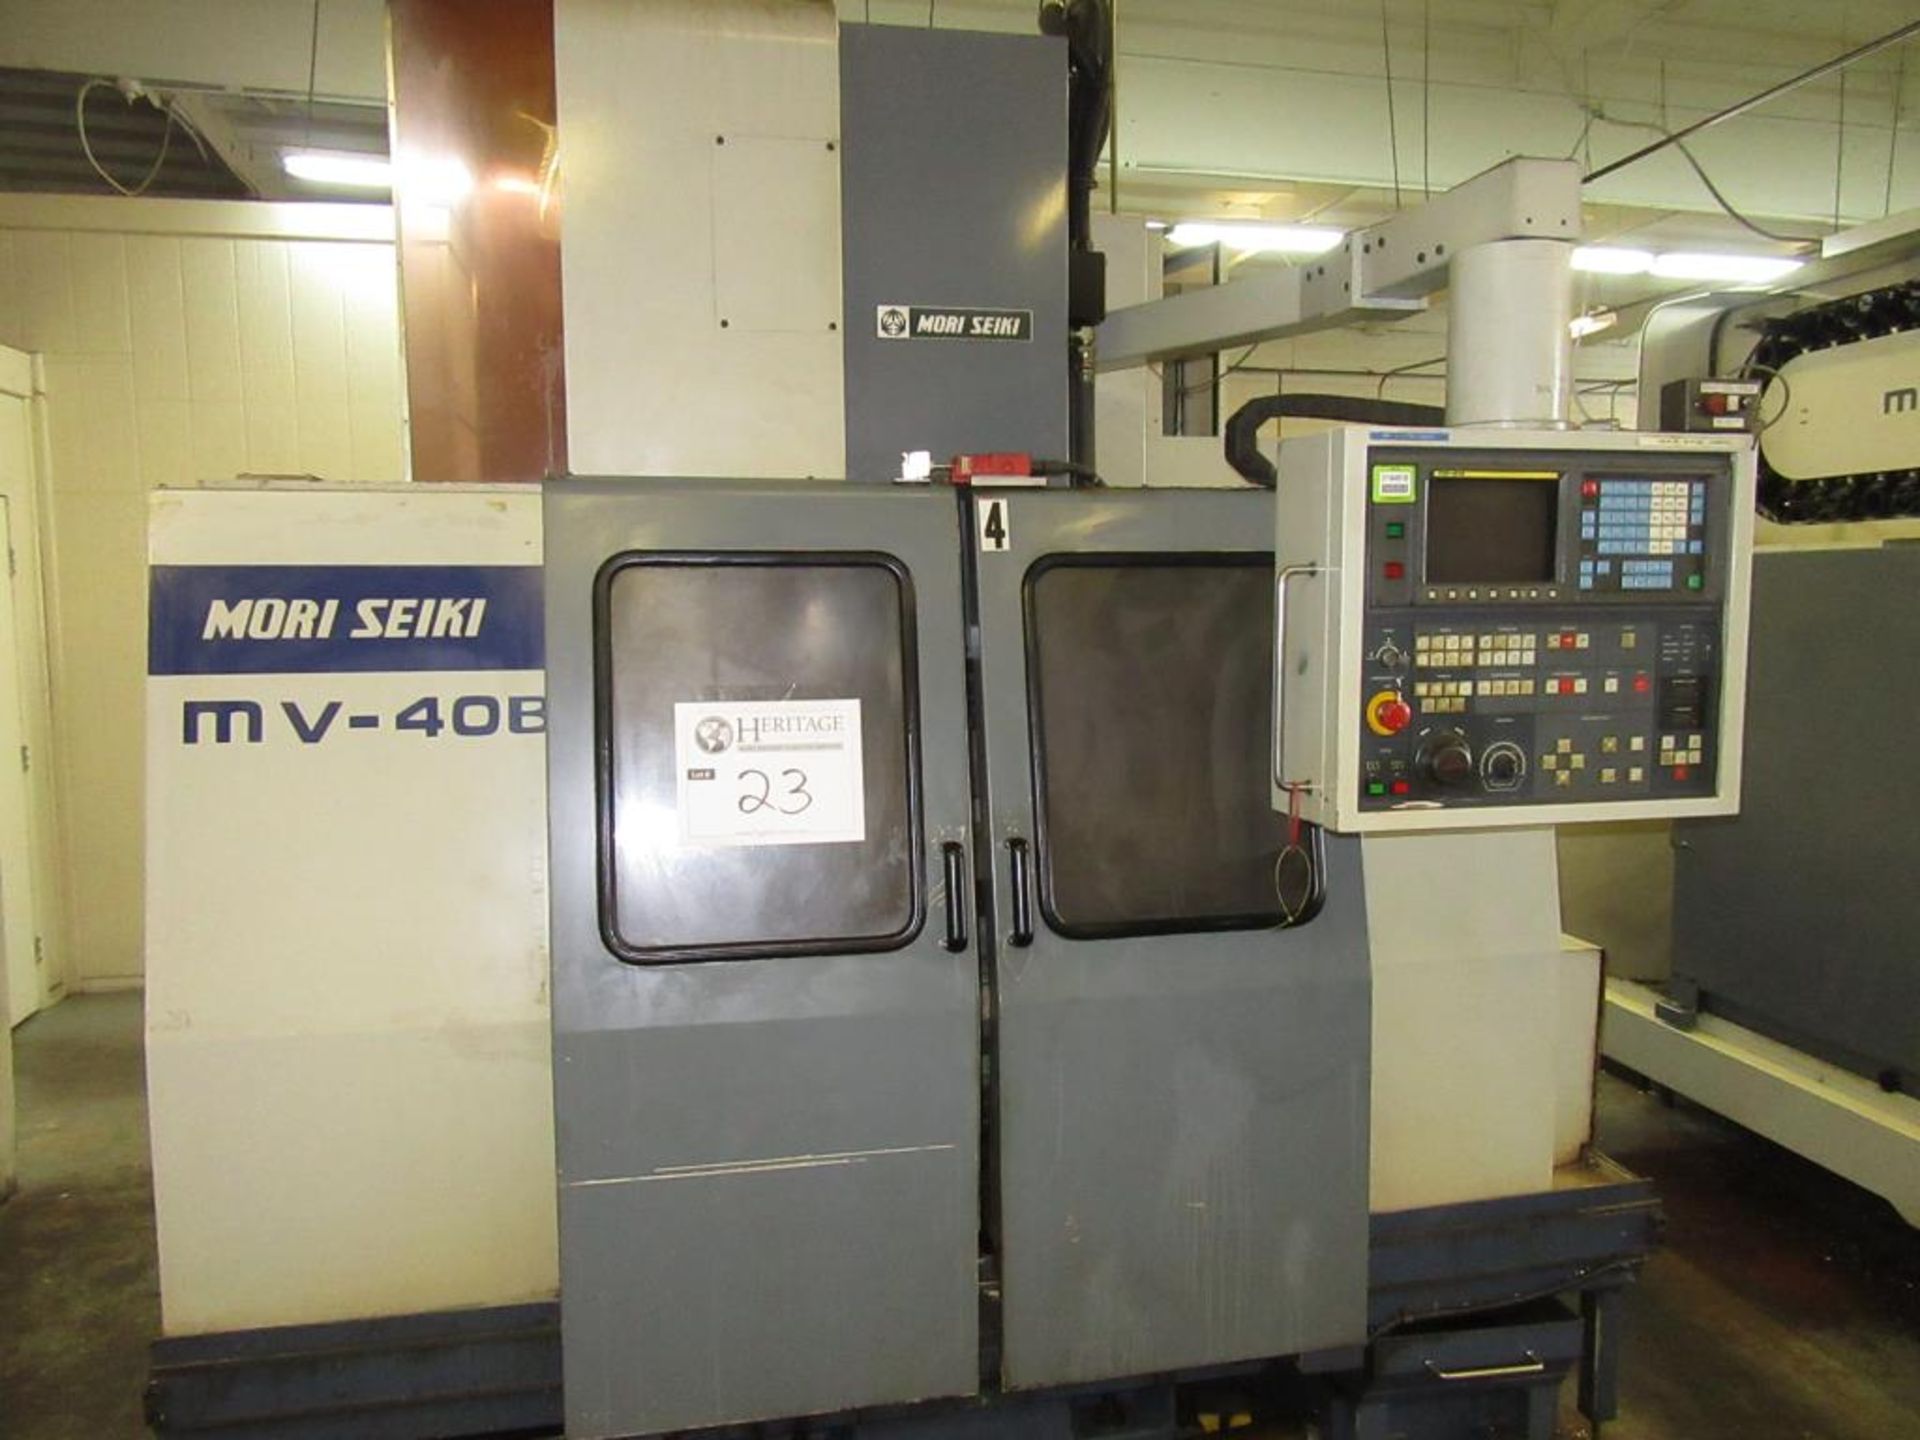 Mori Seiki MV-40B 1990 - CNC Vertical Machining Center with MF-M4 3-Axis Control Panel, Table Size